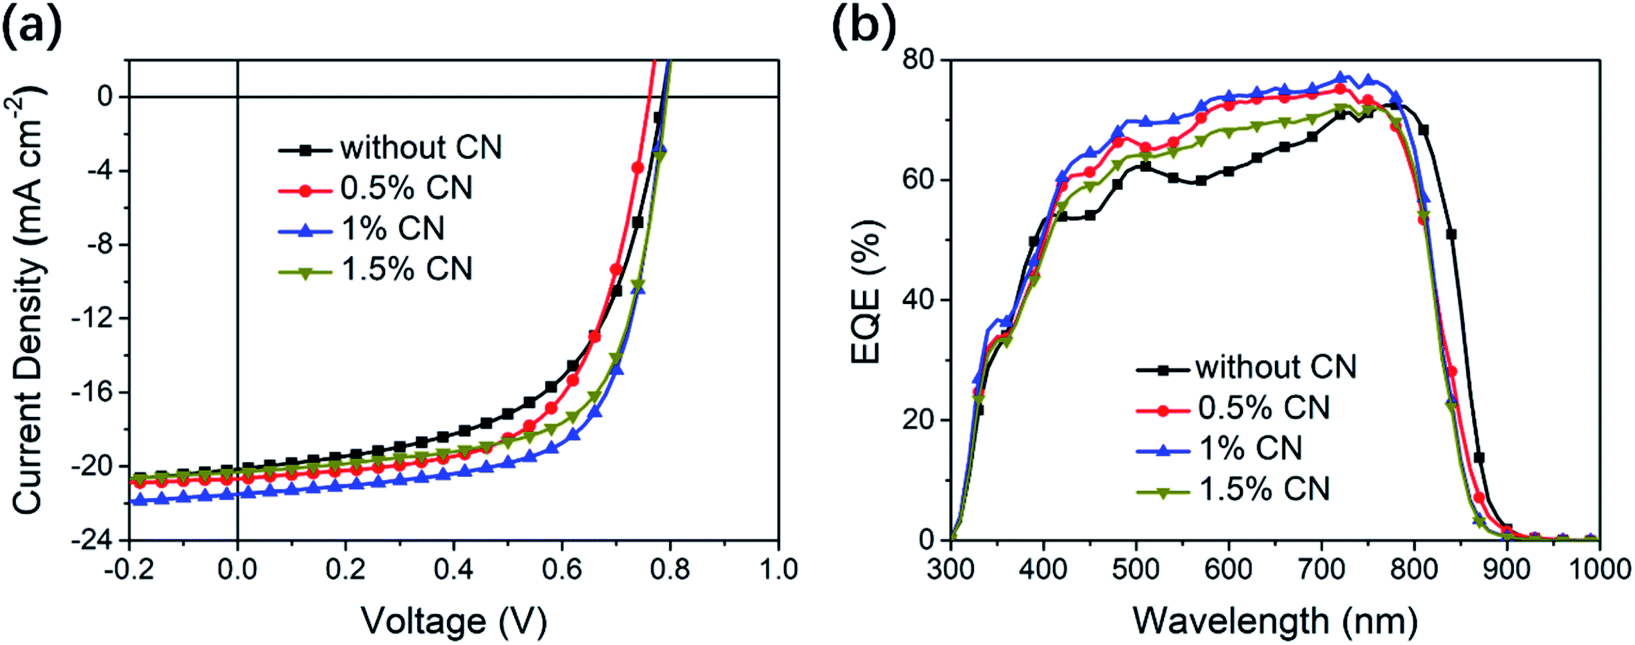 The Role Of Connectivity In Significant Bandgap Narrowing For Fused Pyrene Based Non Fullerene Acceptors Toward High Efficiency Organic Solar Cells Journal Of Materials Chemistry A Rsc Publishing Doi 10 1039 D0ta005g